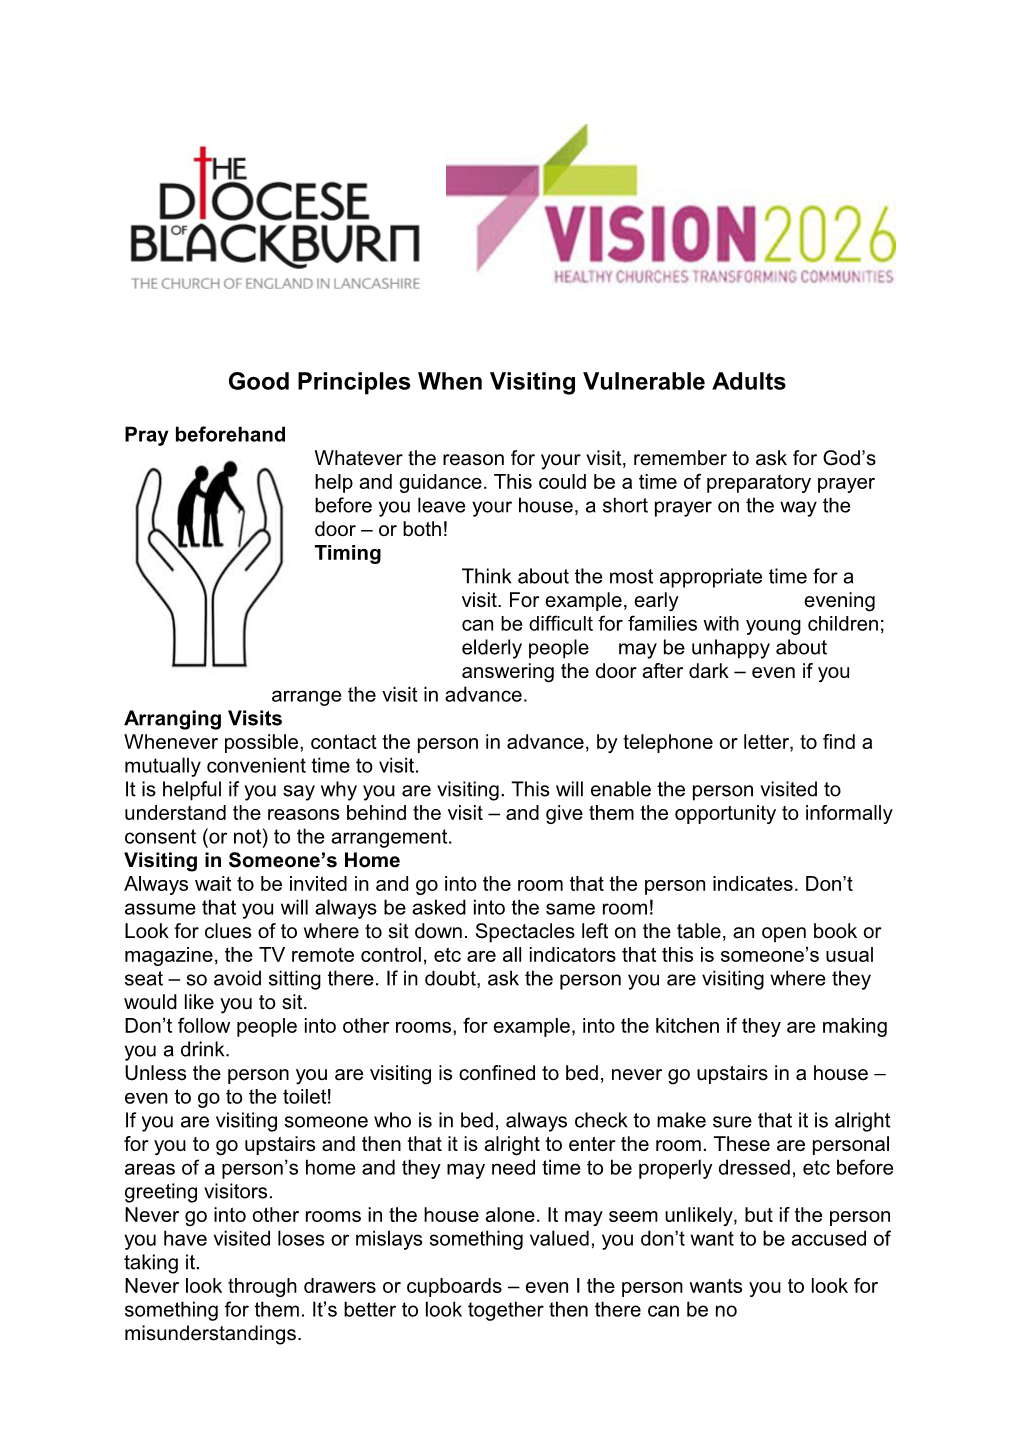 Good Principles When Visiting Vulnerable Adults